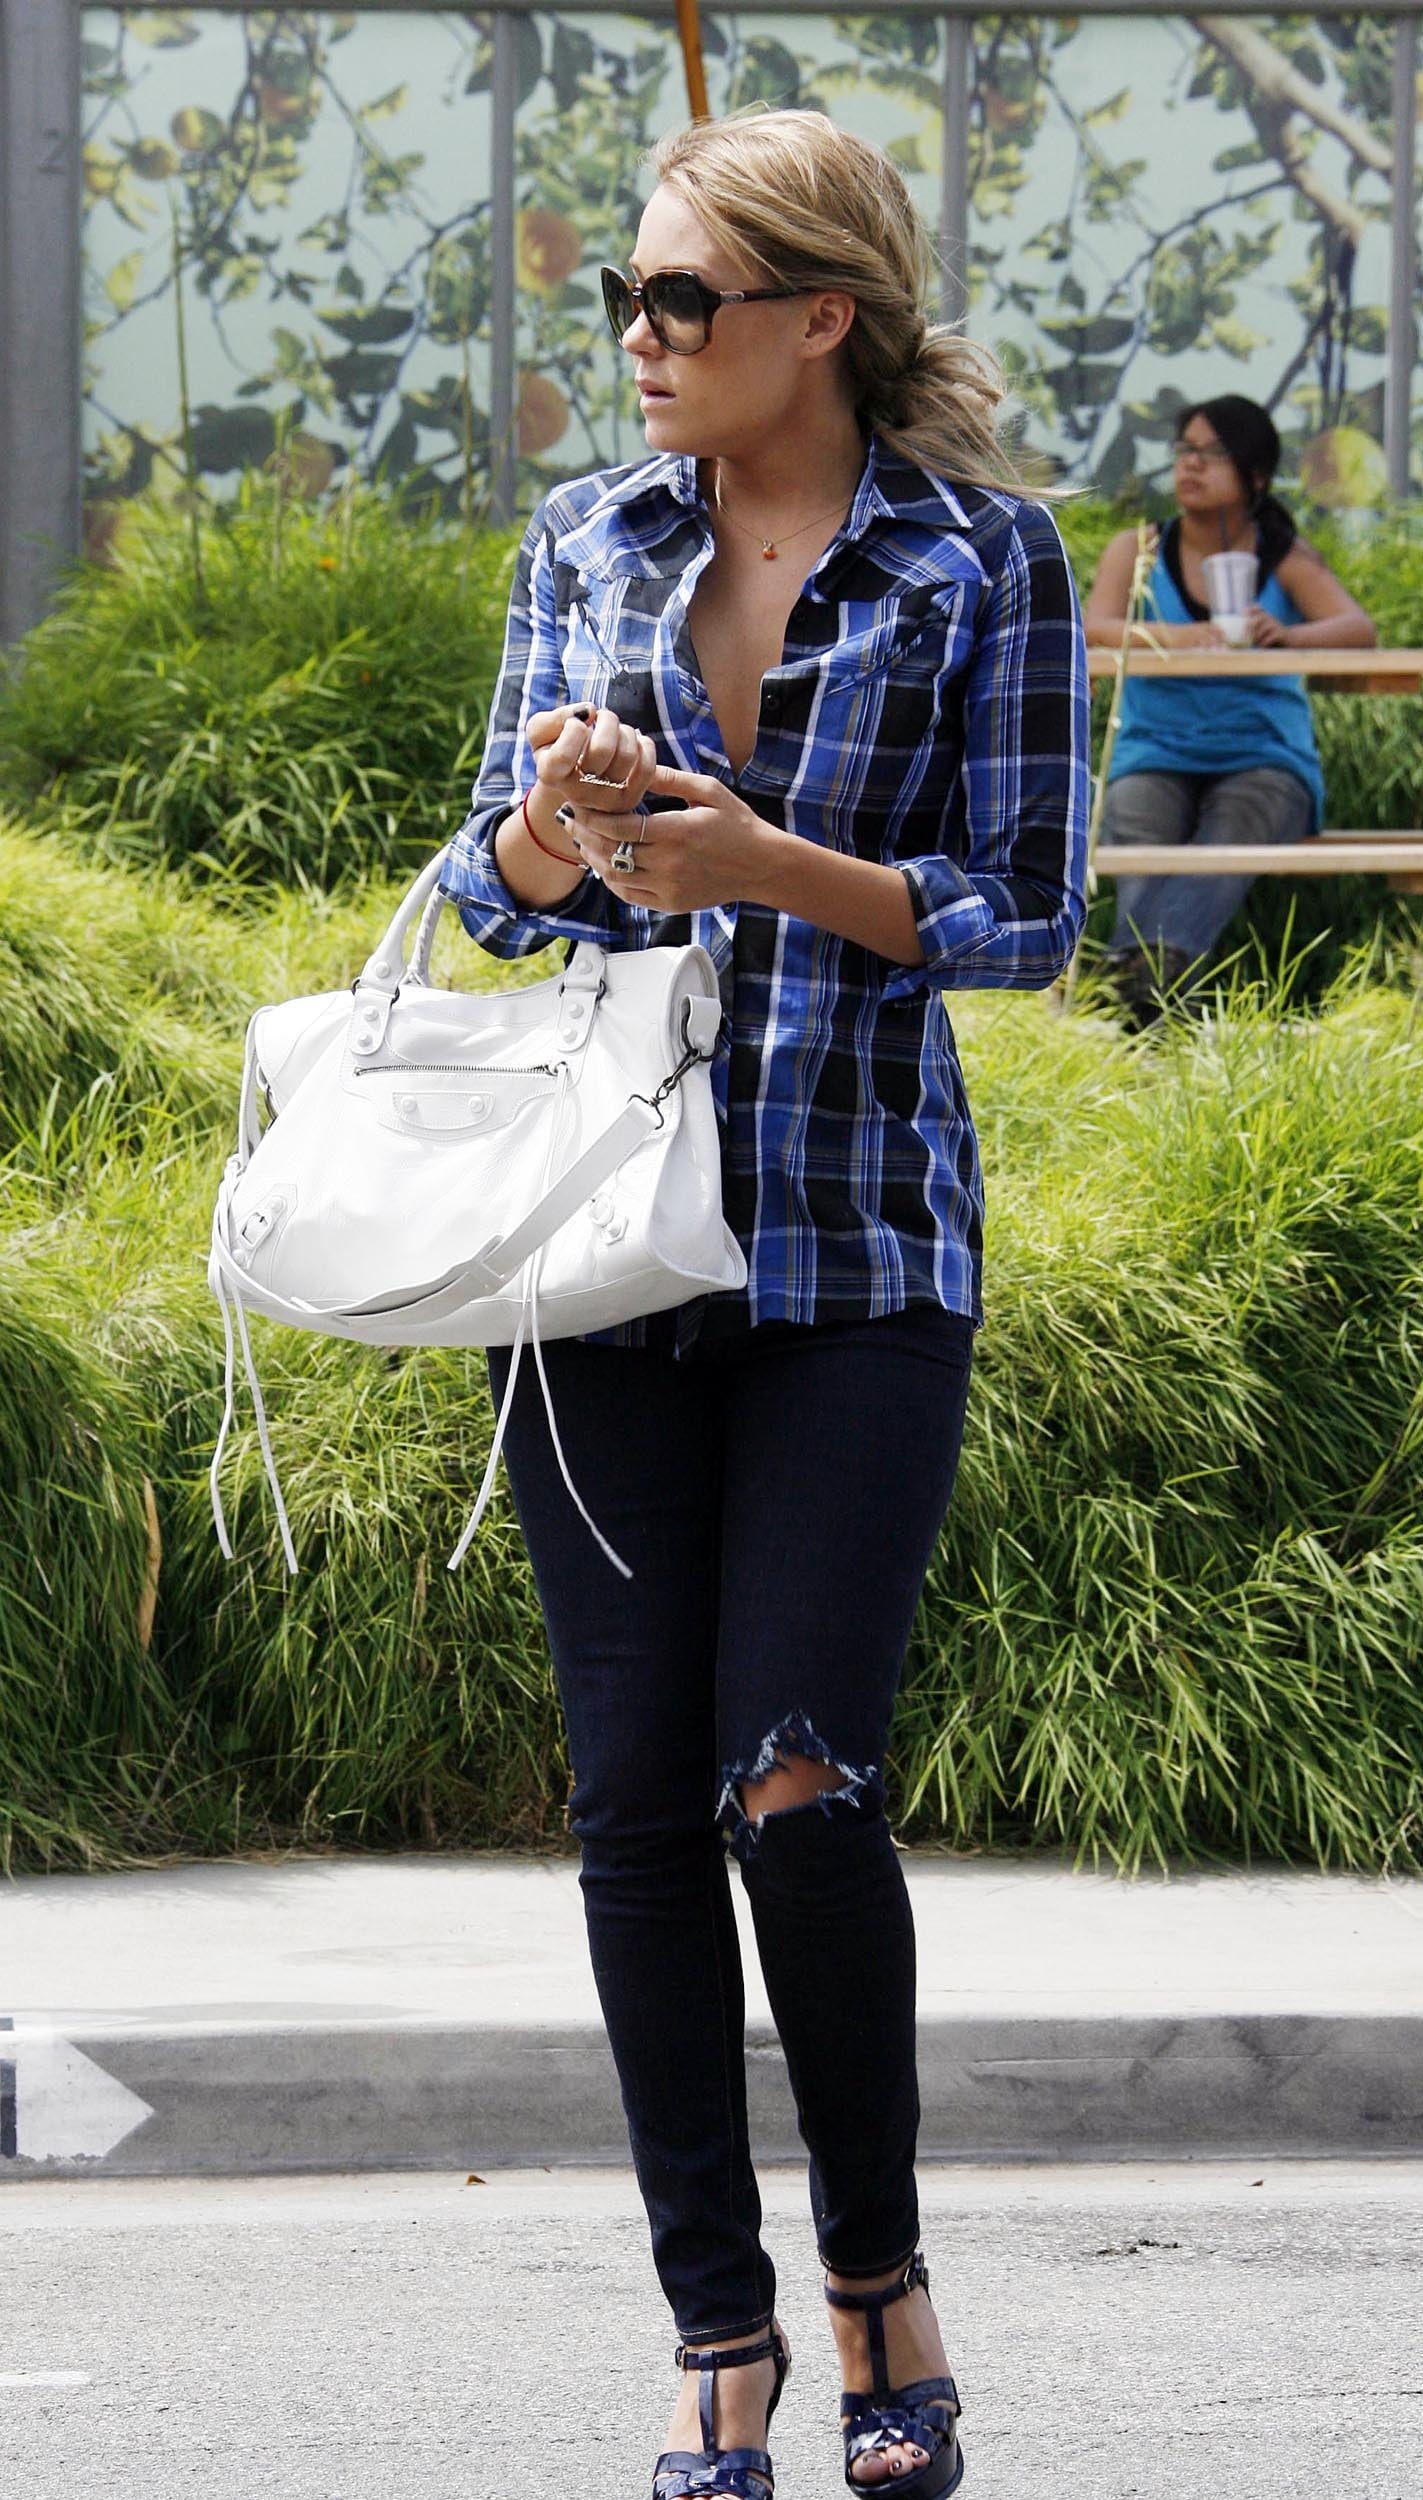 Where can I get Lauren Conrad's jeans, plaid shirt, sunglasses and